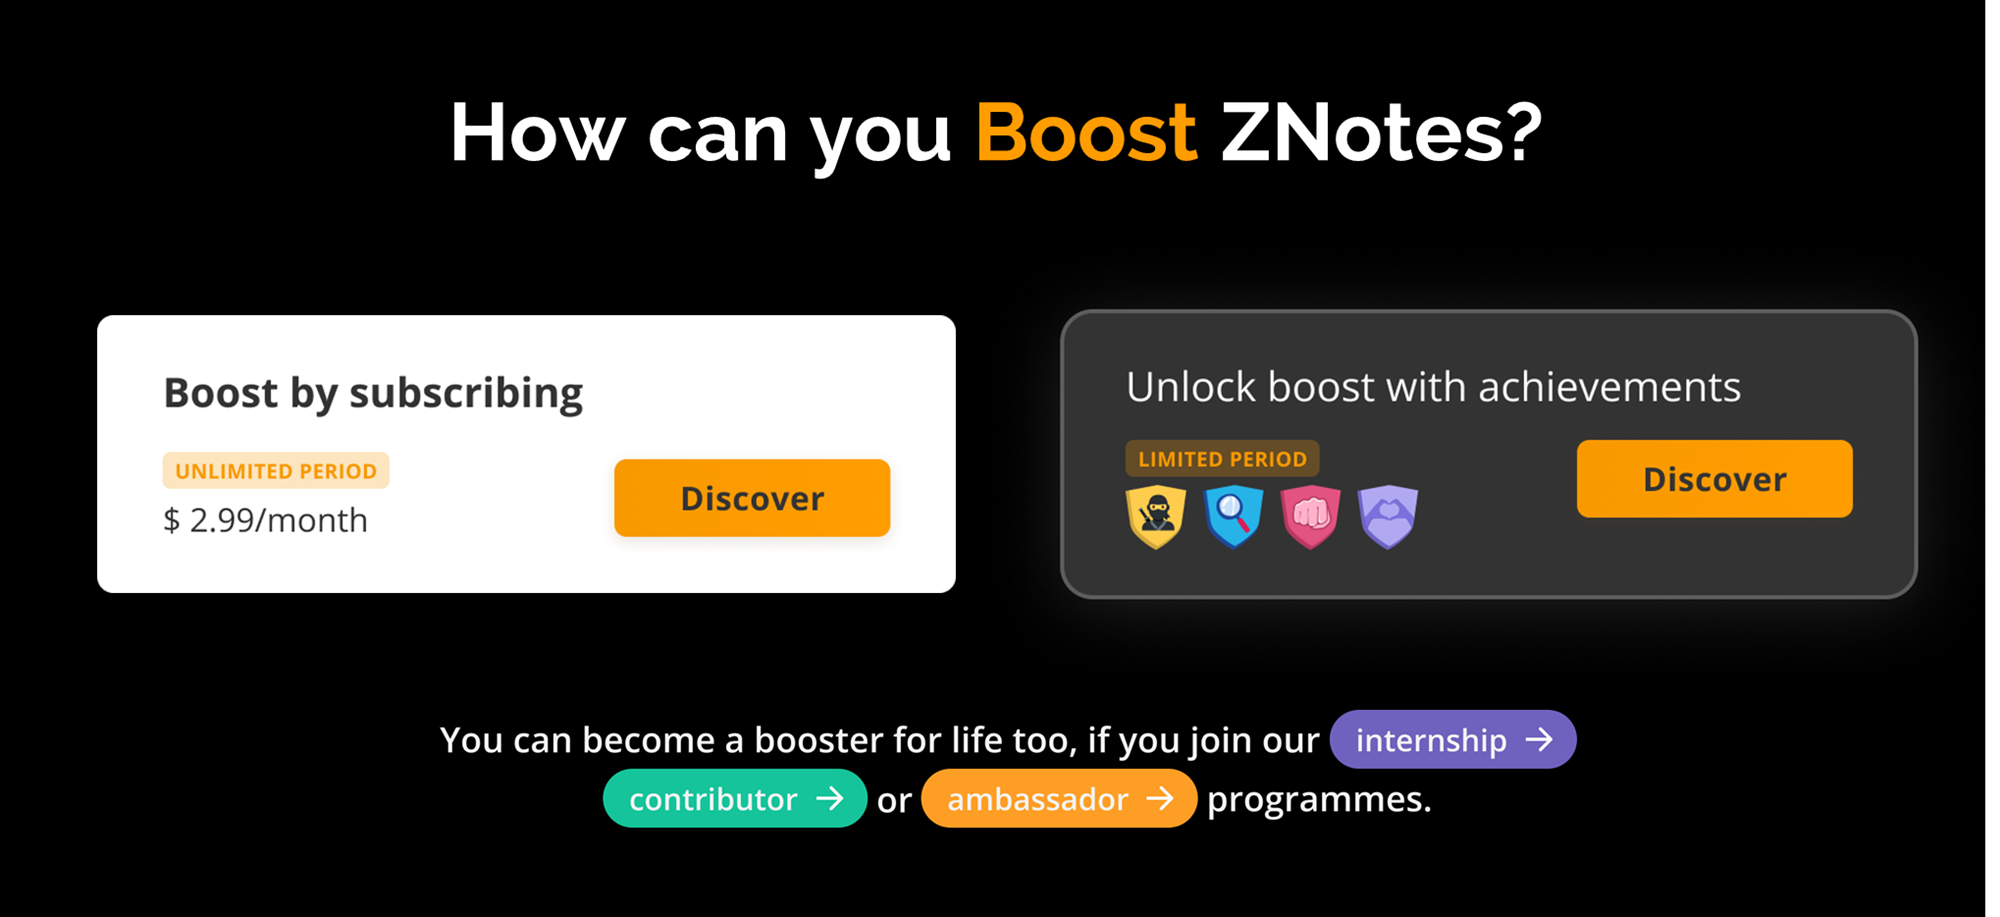 Boosting ZNotes for its Next Decade of Impact